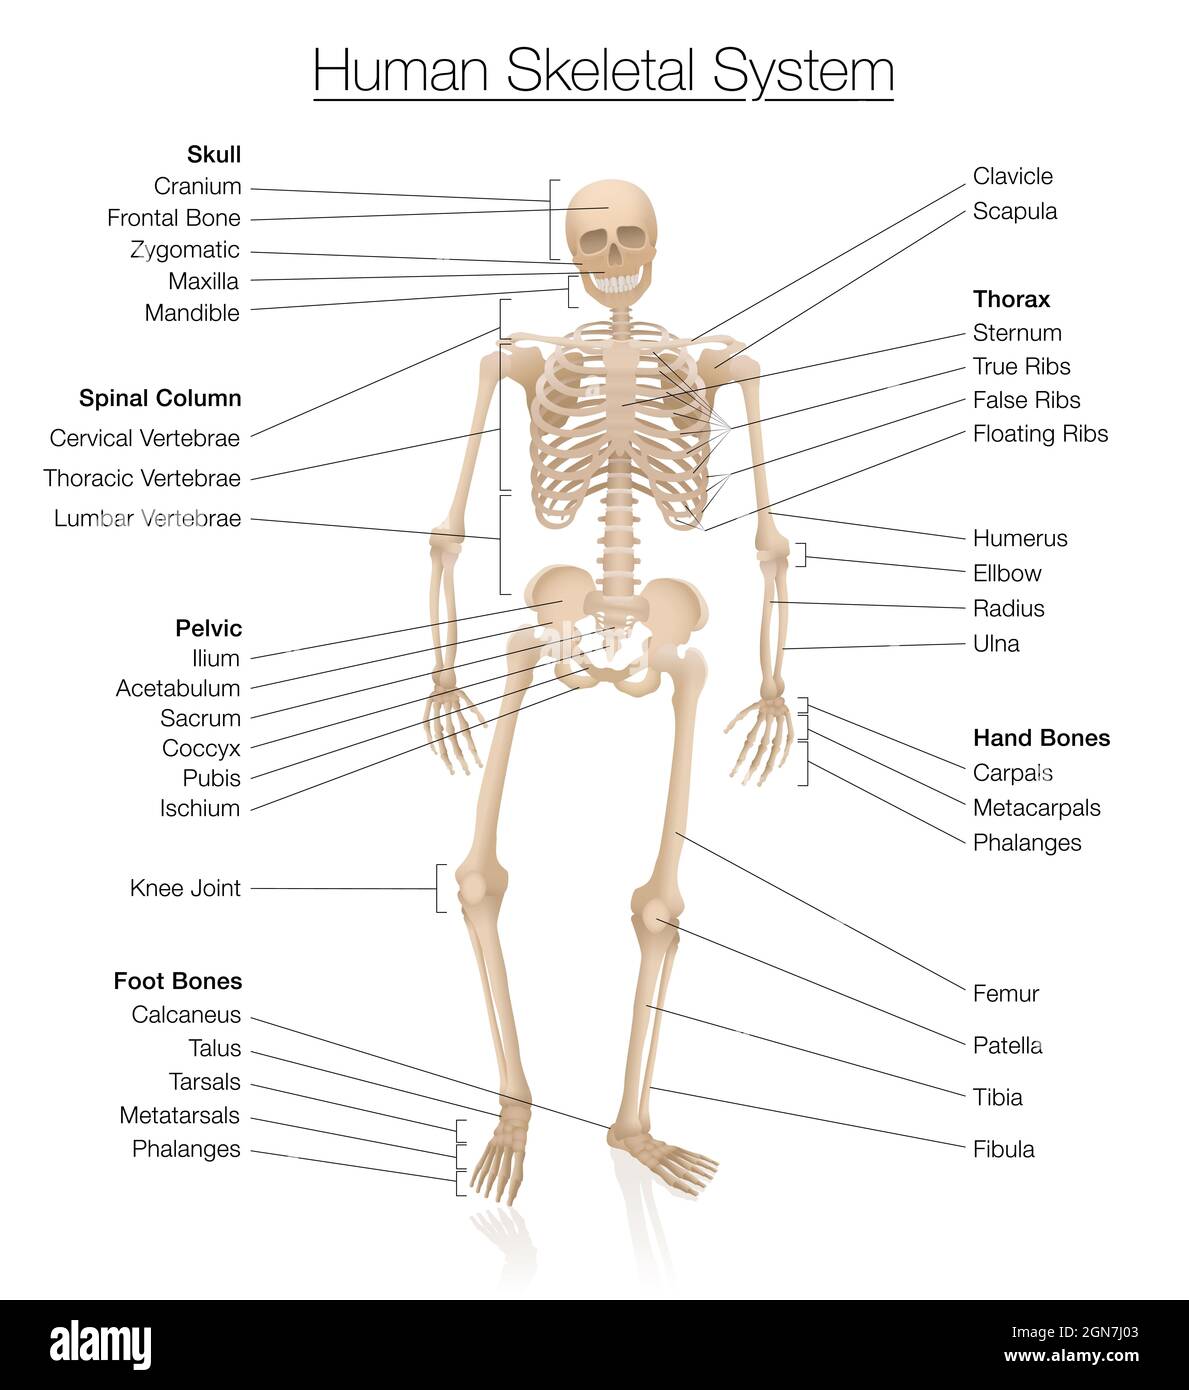 Skeletal system chart. Human skeleton labeled with most important bones like skull, spinal column, pelvic, thorax, ribs, sternum, hand and foot bones. Stock Photo